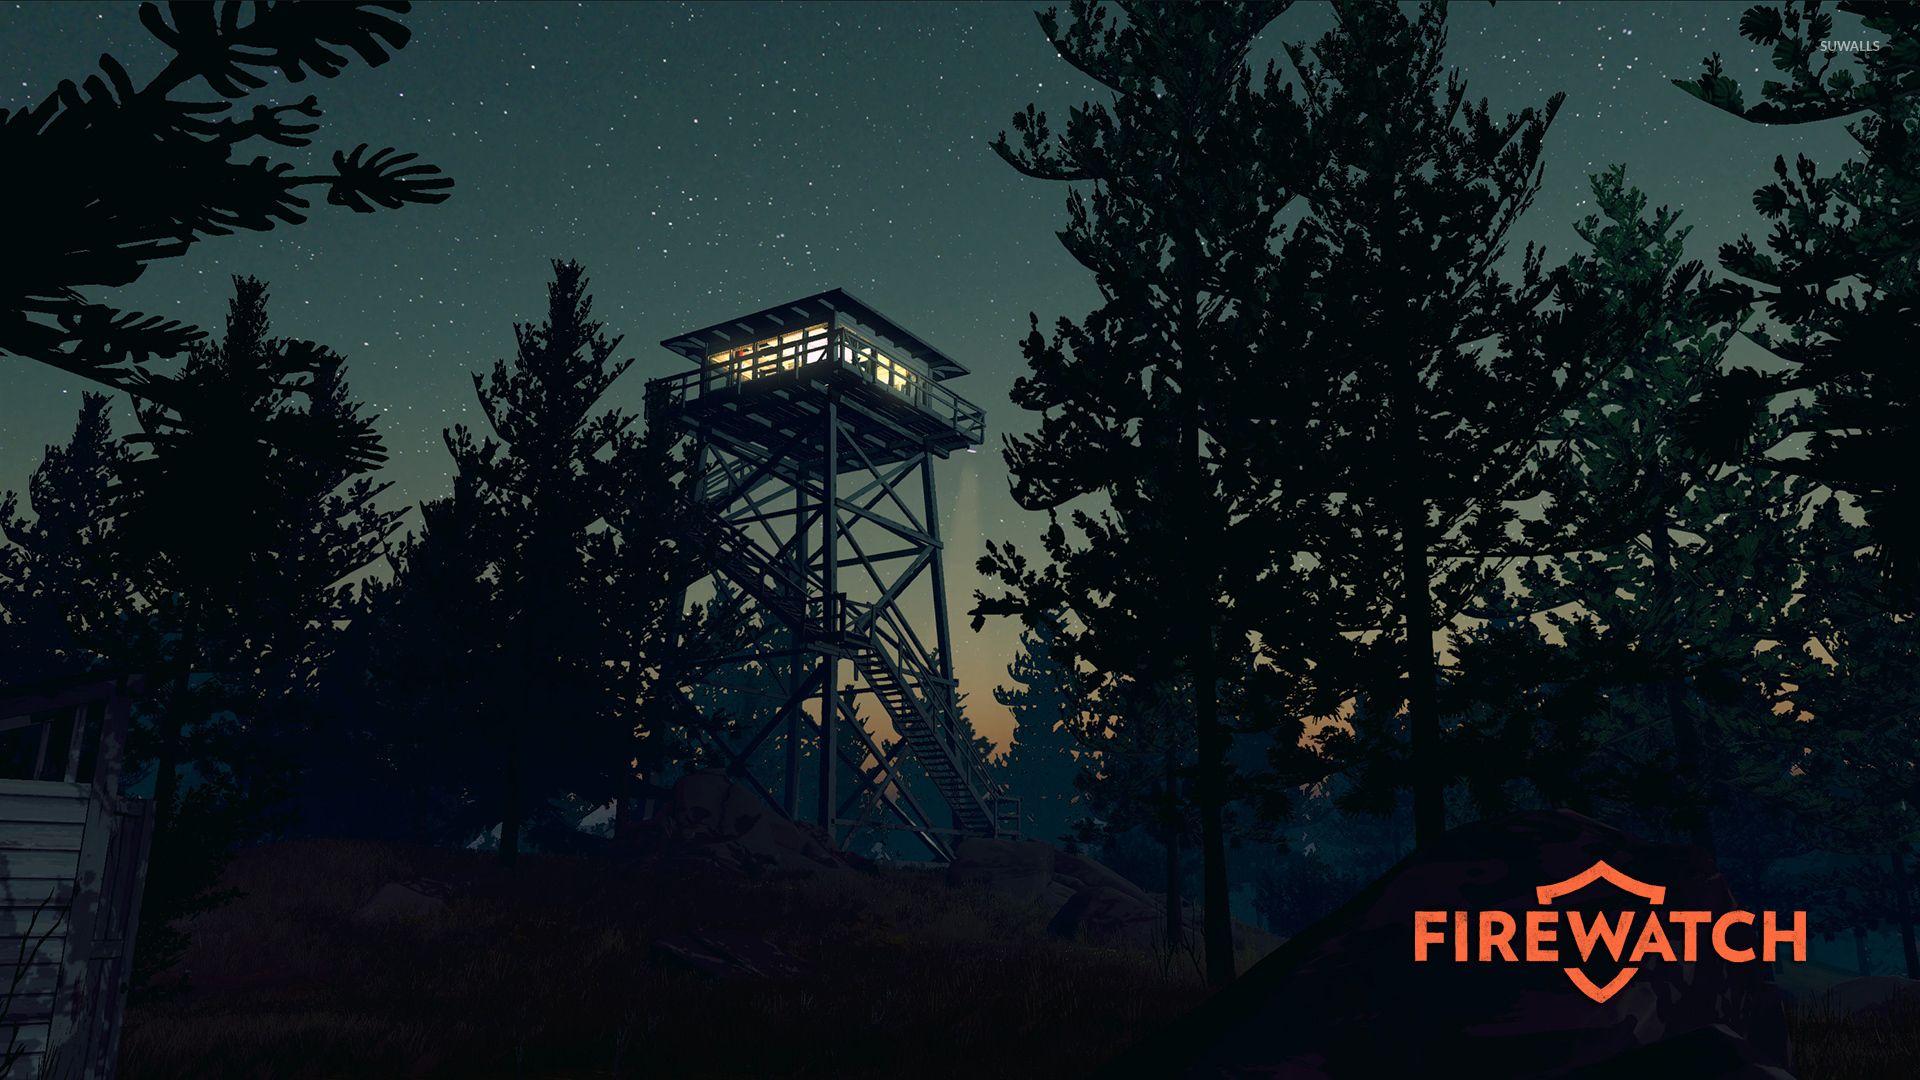 Fire lookout tower in the night wallpaper wallpaper